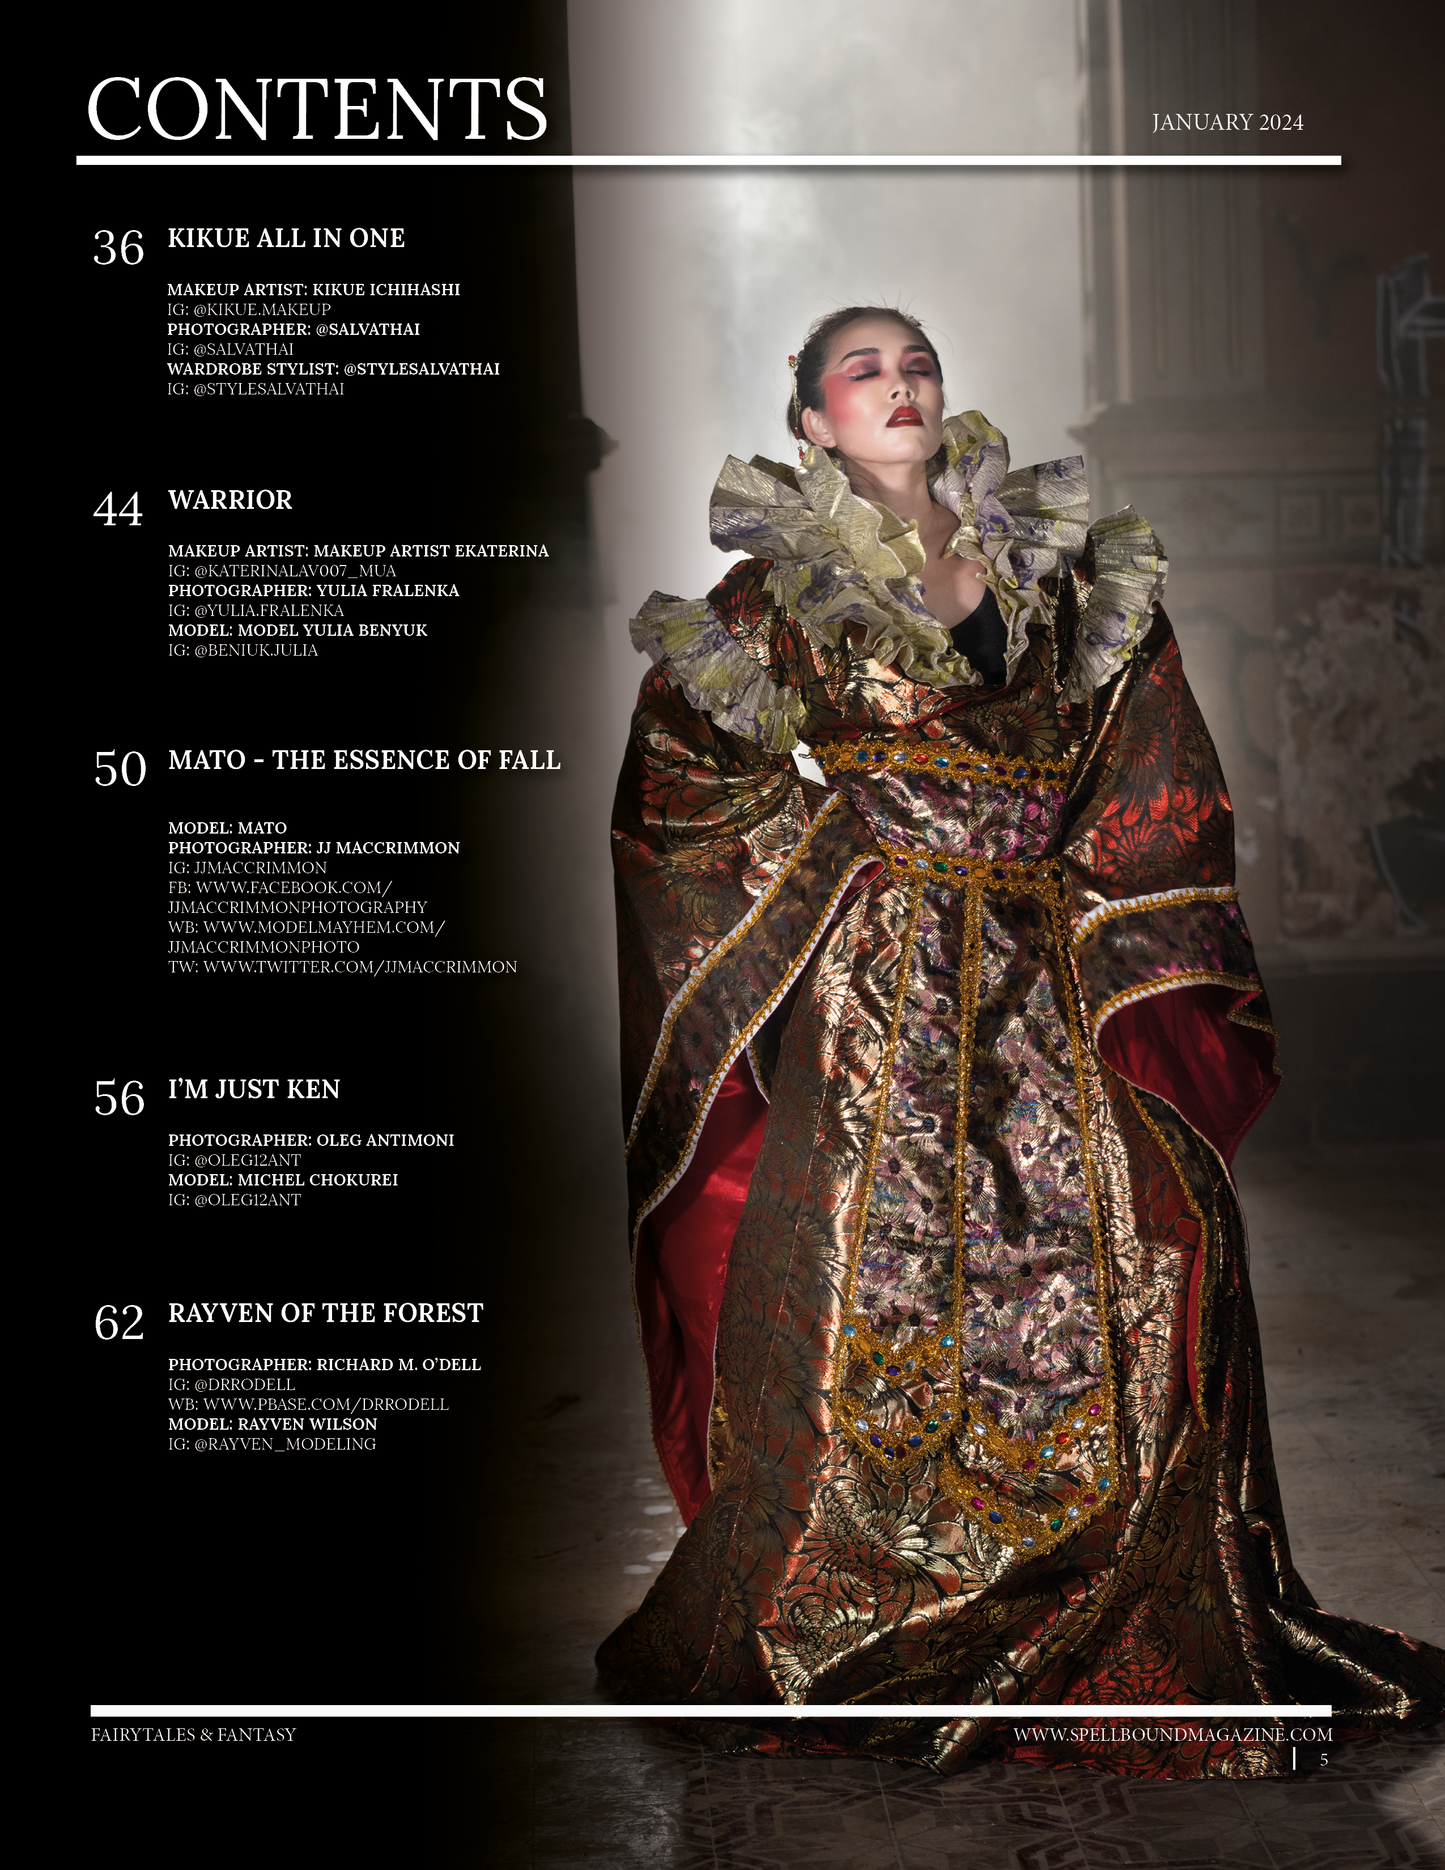 Spellbound Fairytales and Fantasy Magazine - January 2024: The Cosplay Edition Issue 1